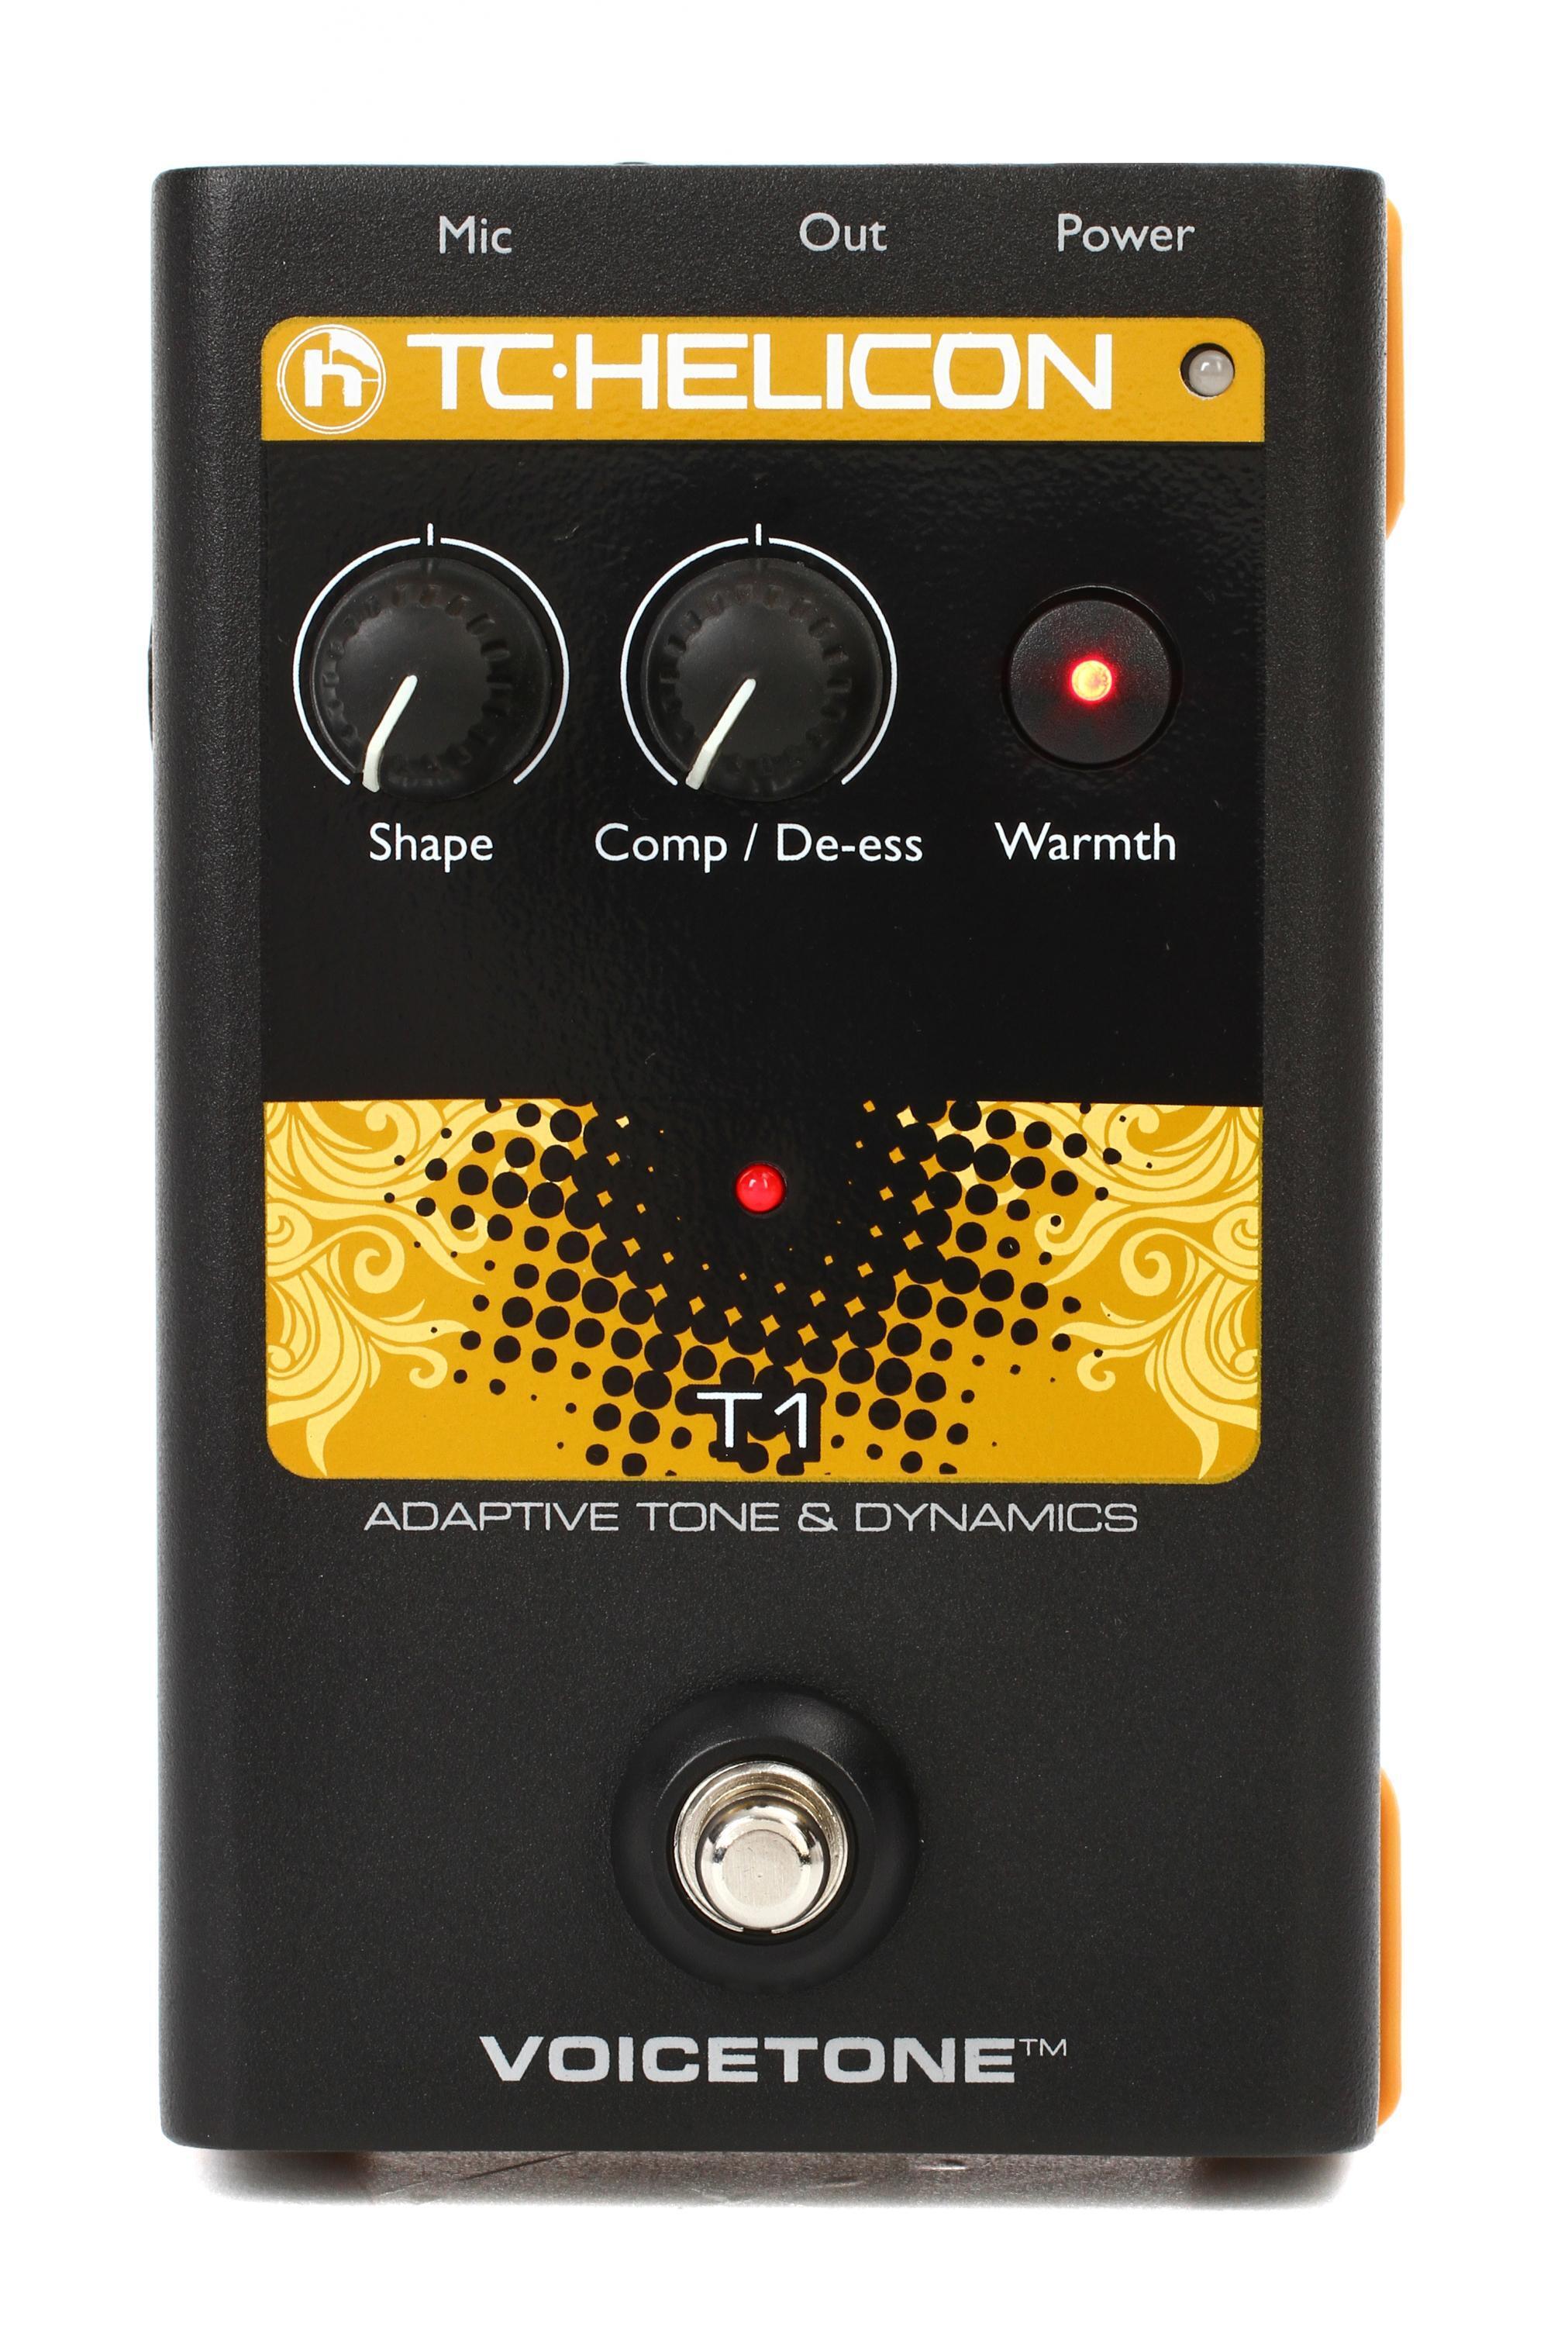 TC-Helicon VoiceTone R1 Vocal Reverb Pedal | Sweetwater